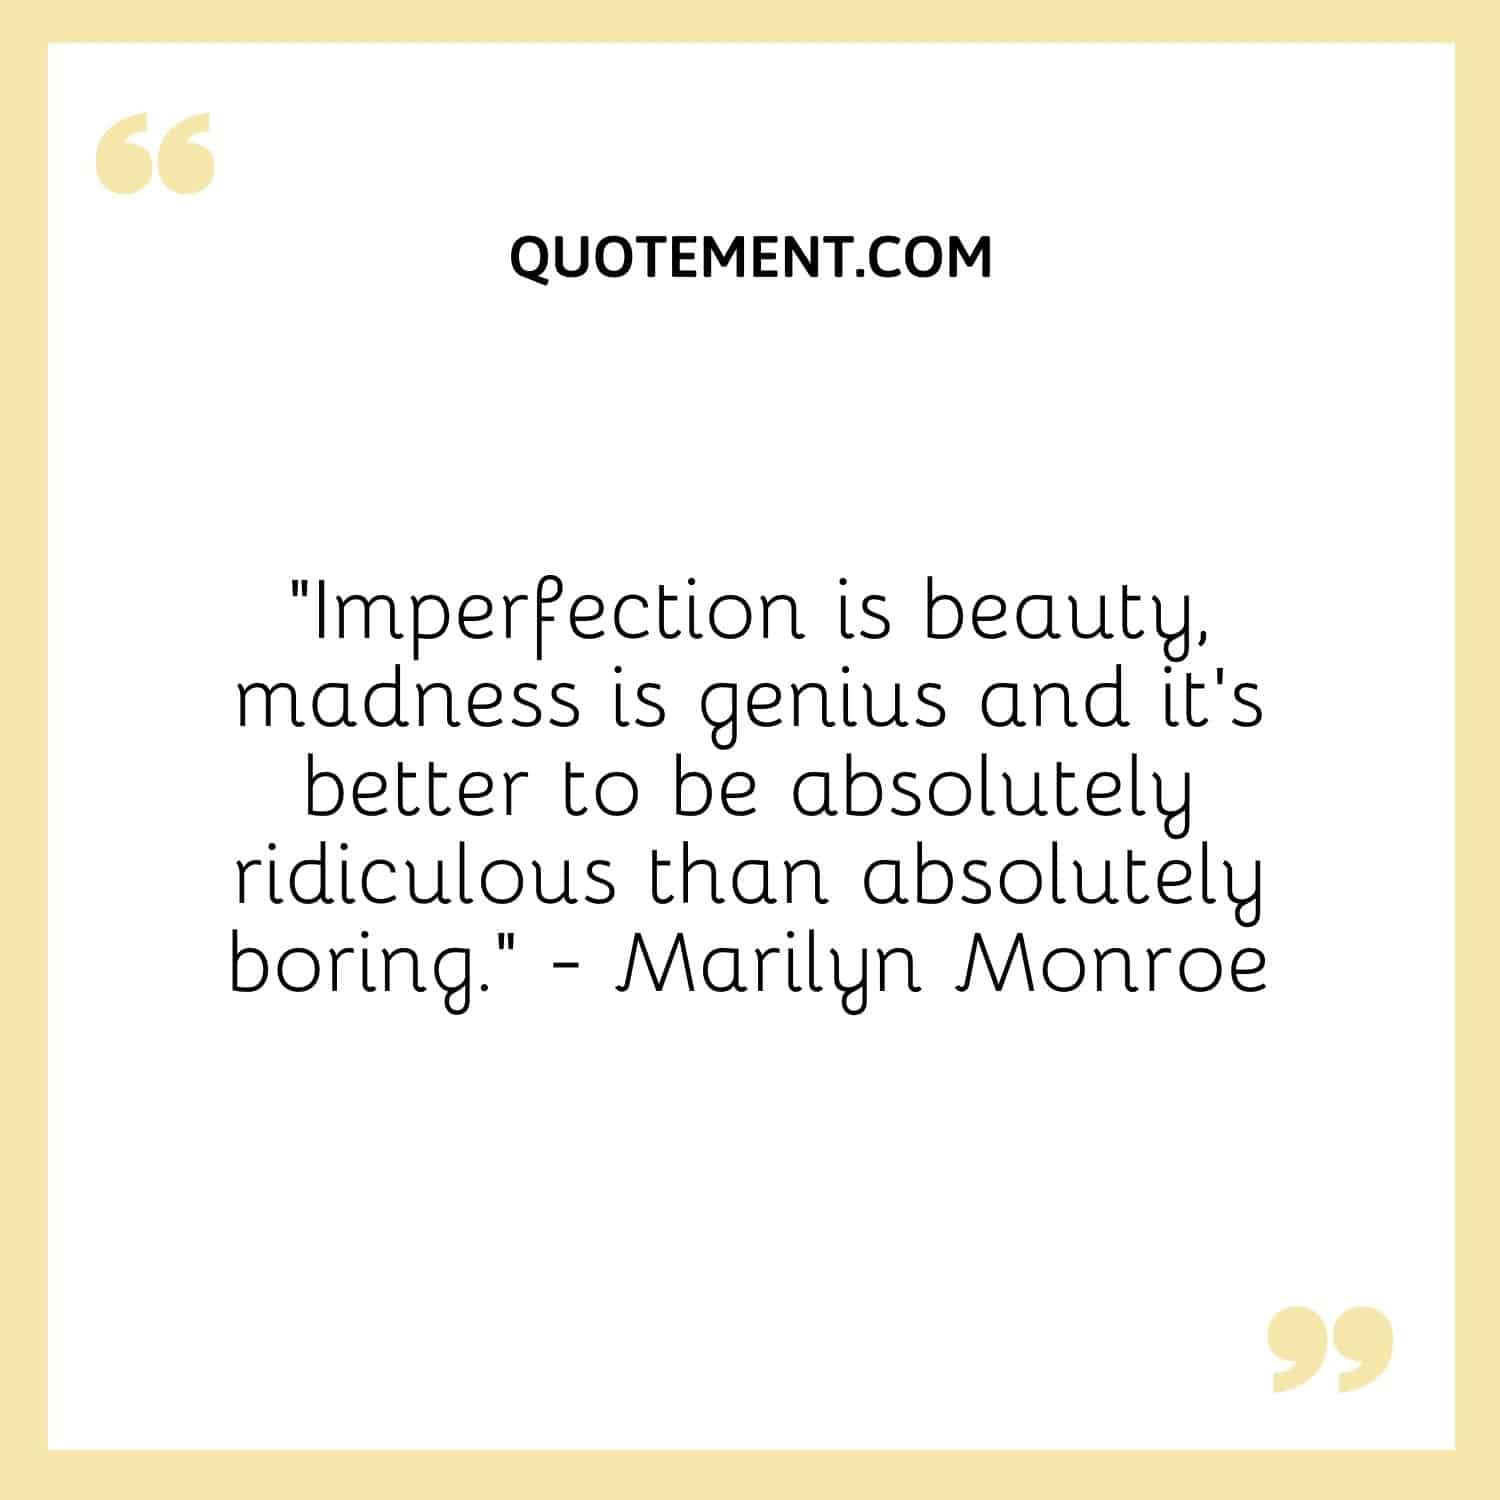 “Imperfection is beauty, madness is genius and it’s better to be absolutely ridiculous than absolutely boring.” — Marilyn Monroe